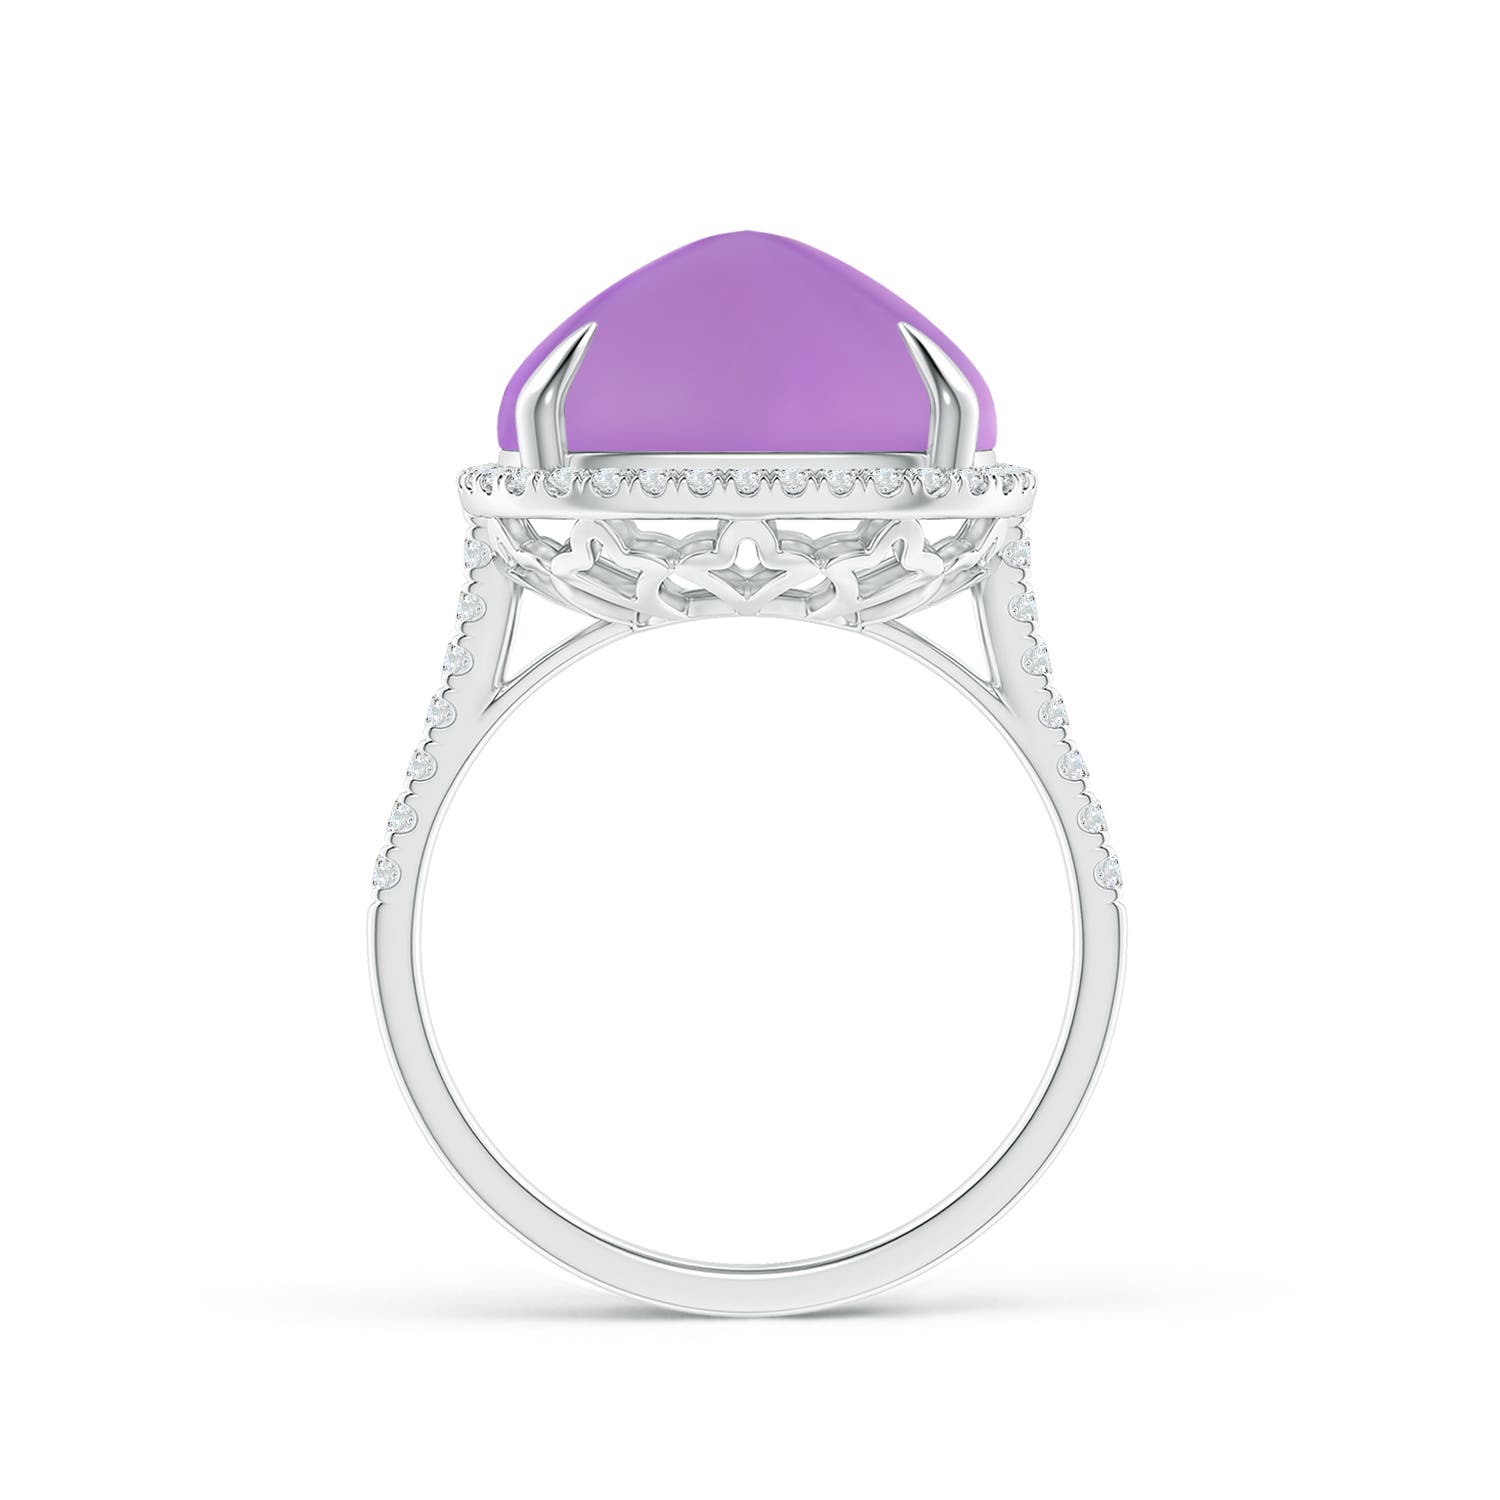 AA - Amethyst / 10.34 CT / 14 KT White Gold